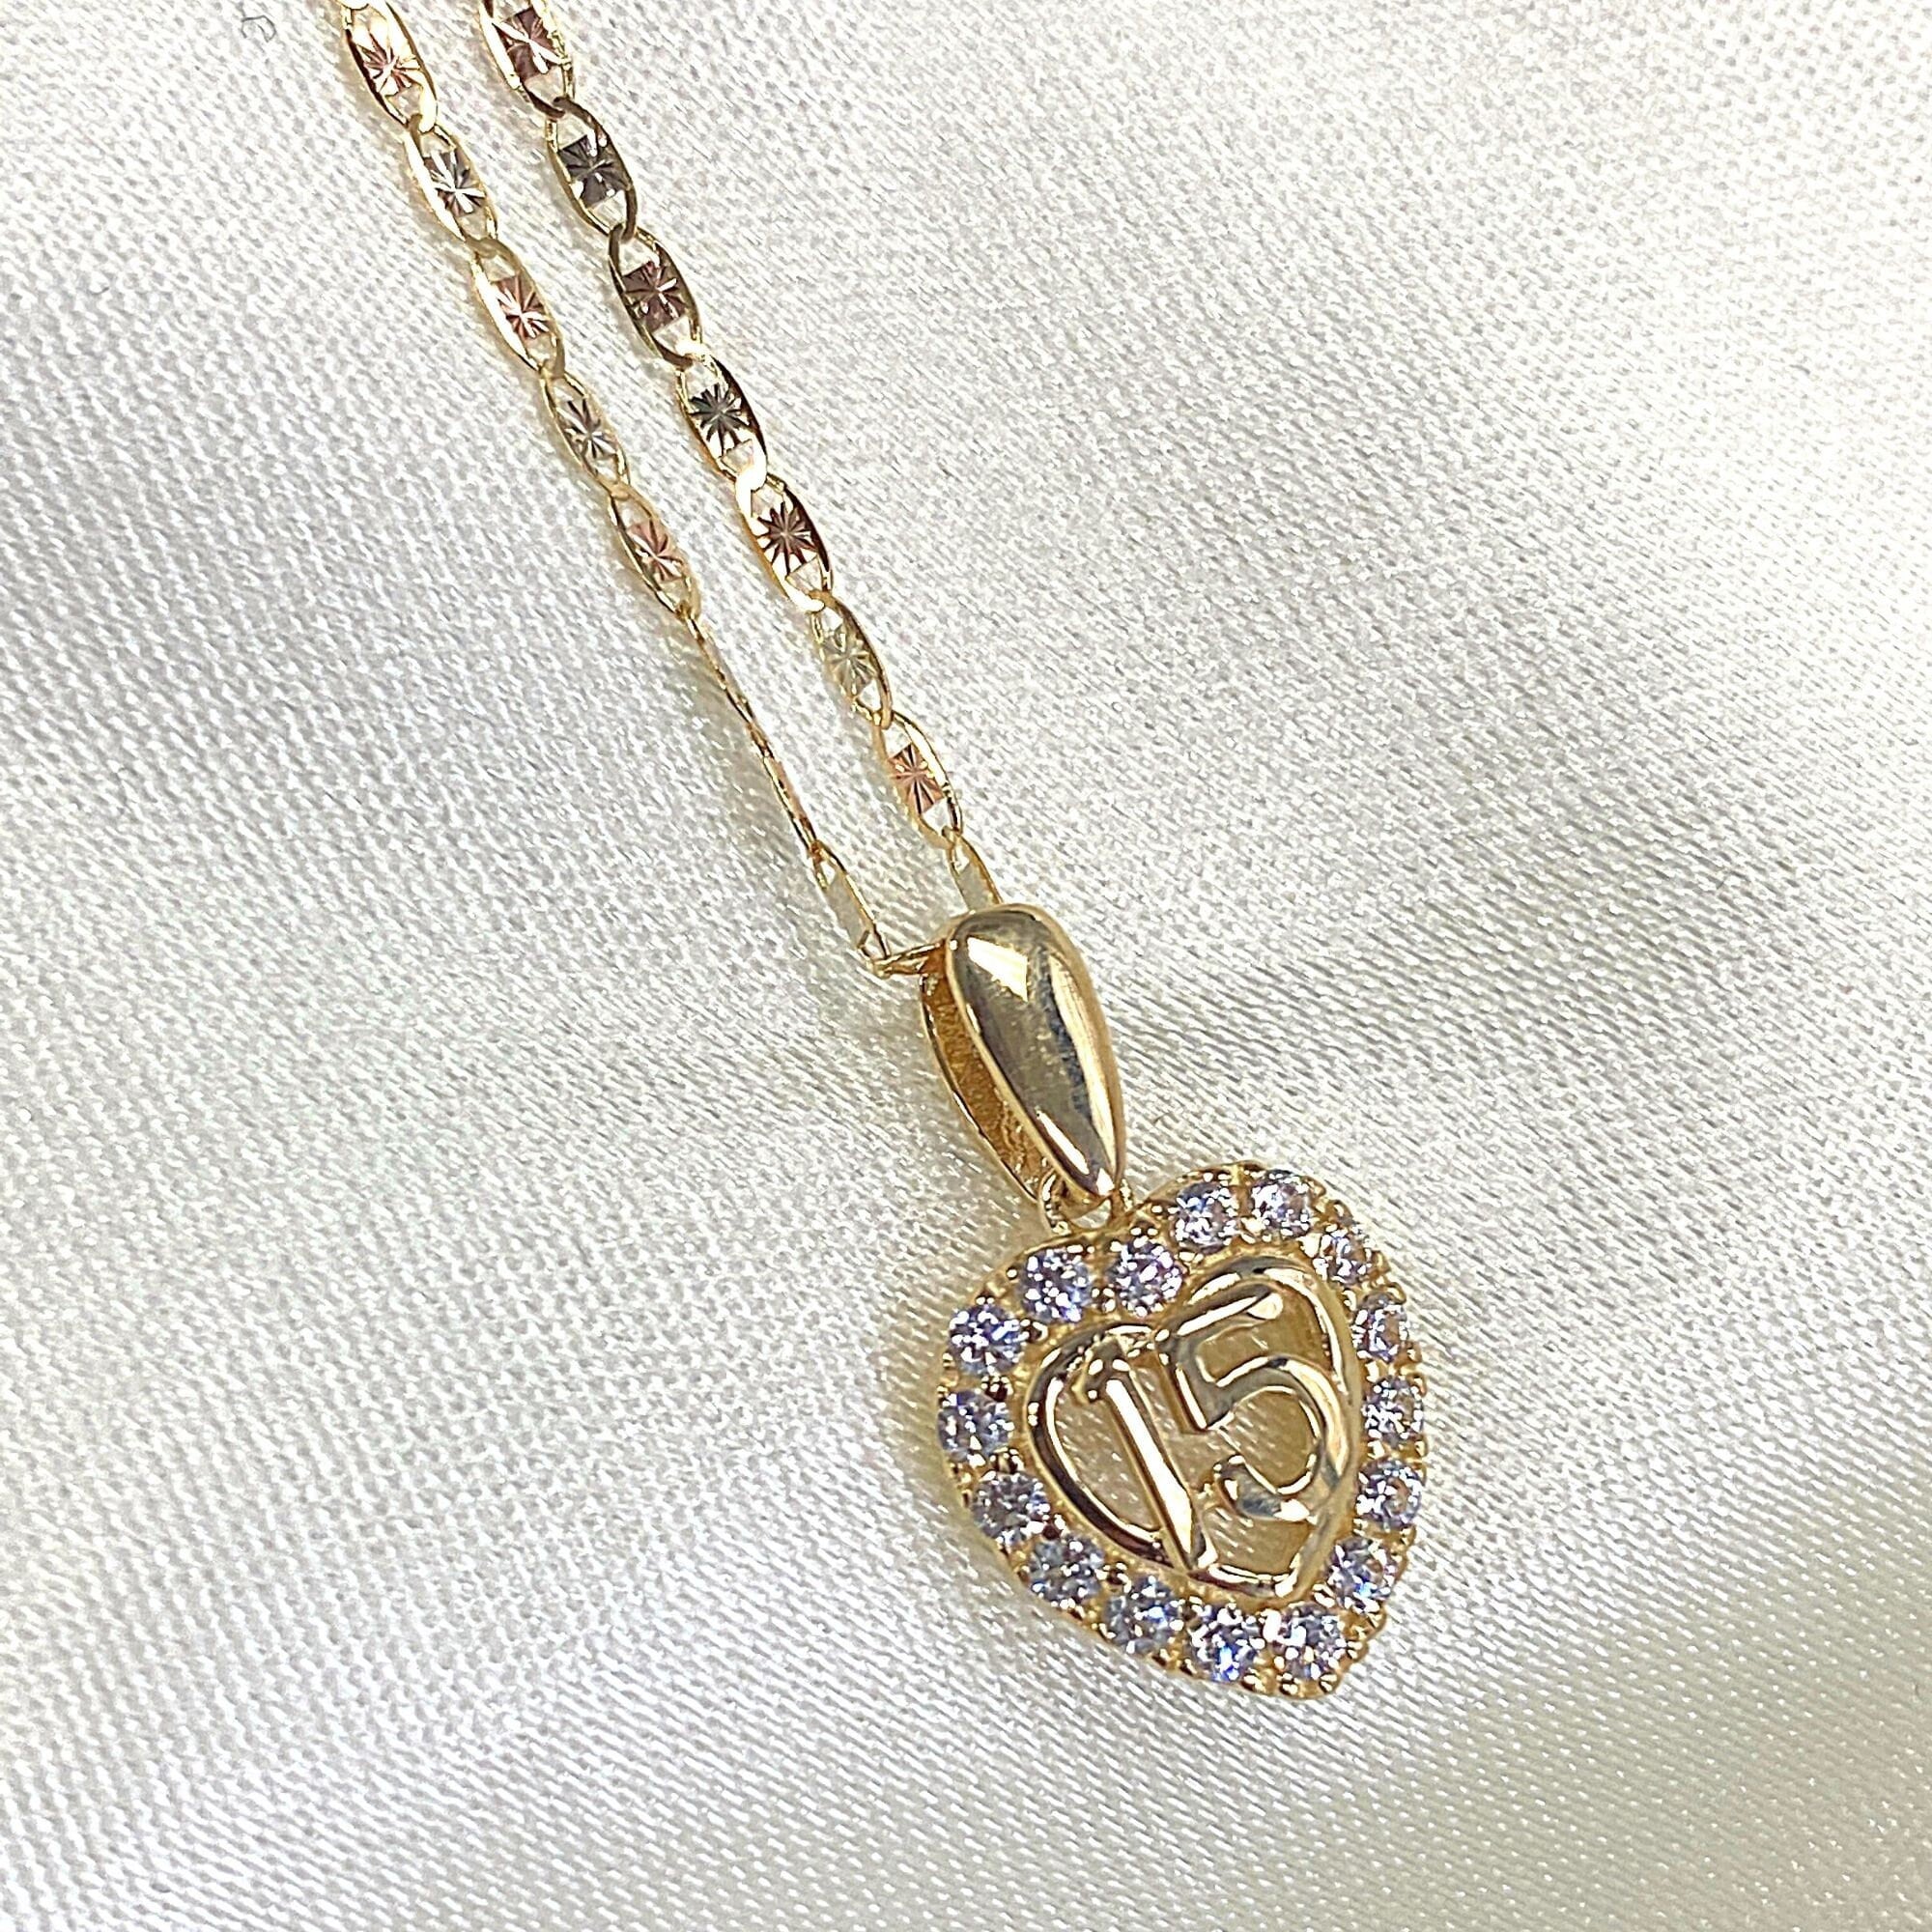 14K White Gold 15 Years Quinceanera Years Heart Charm Pendant For Necklace or Chain